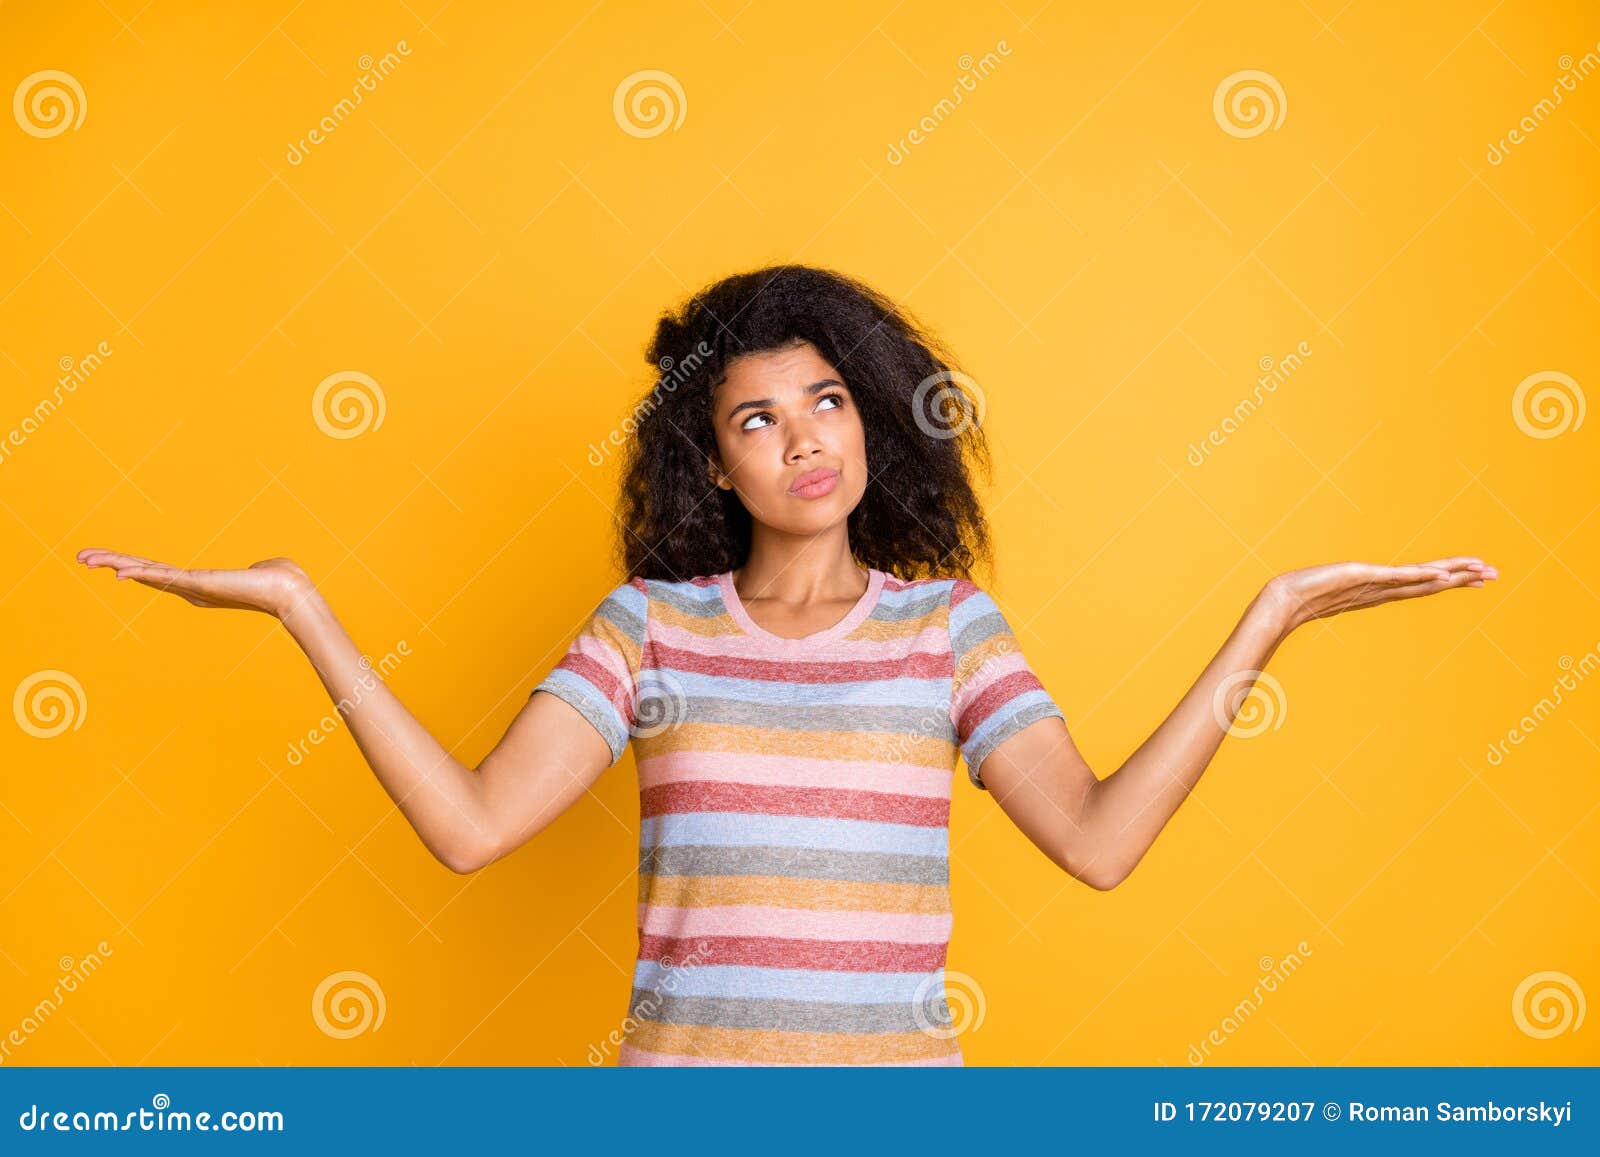 portrait of her she nice attractive doubtful wavy-haired girl in striped tshirt holding on palms invisible objects